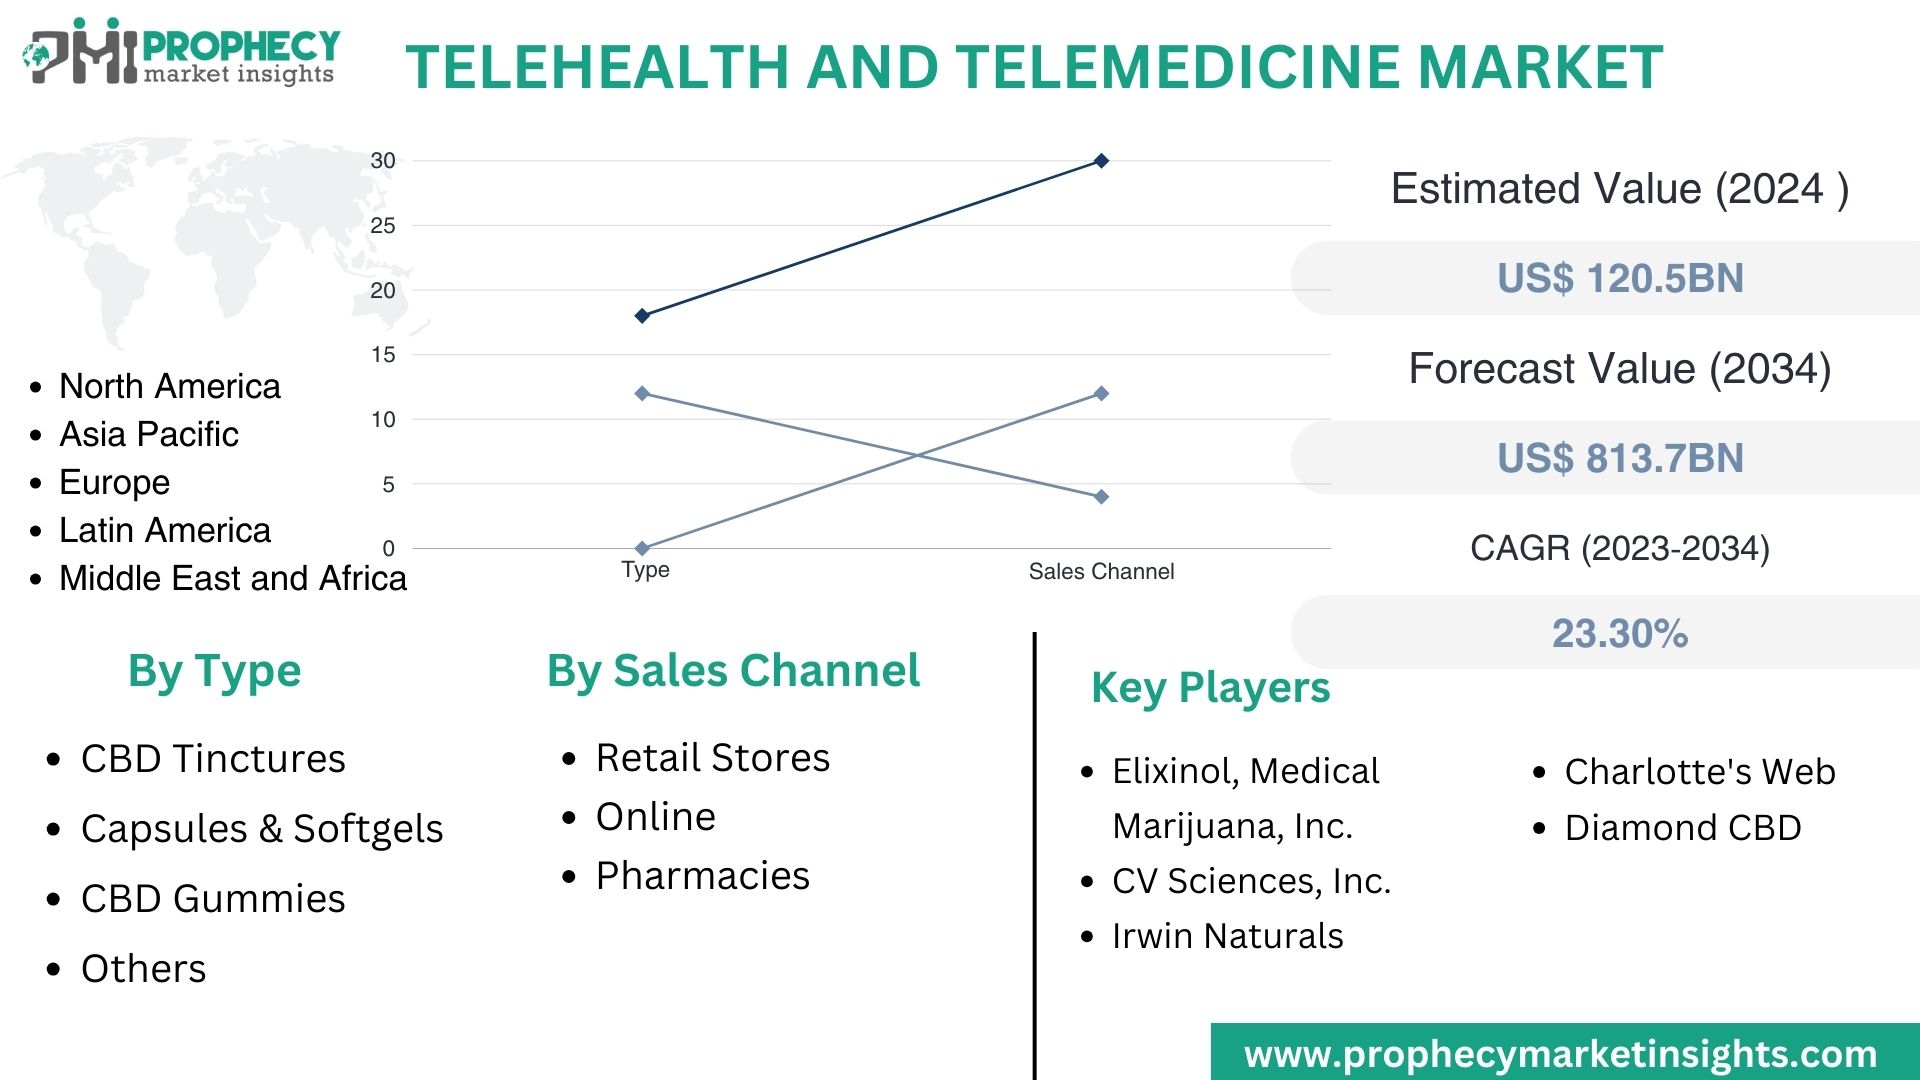 Telehealth and Telemedicine to Surpass USD 813.7 Billion by